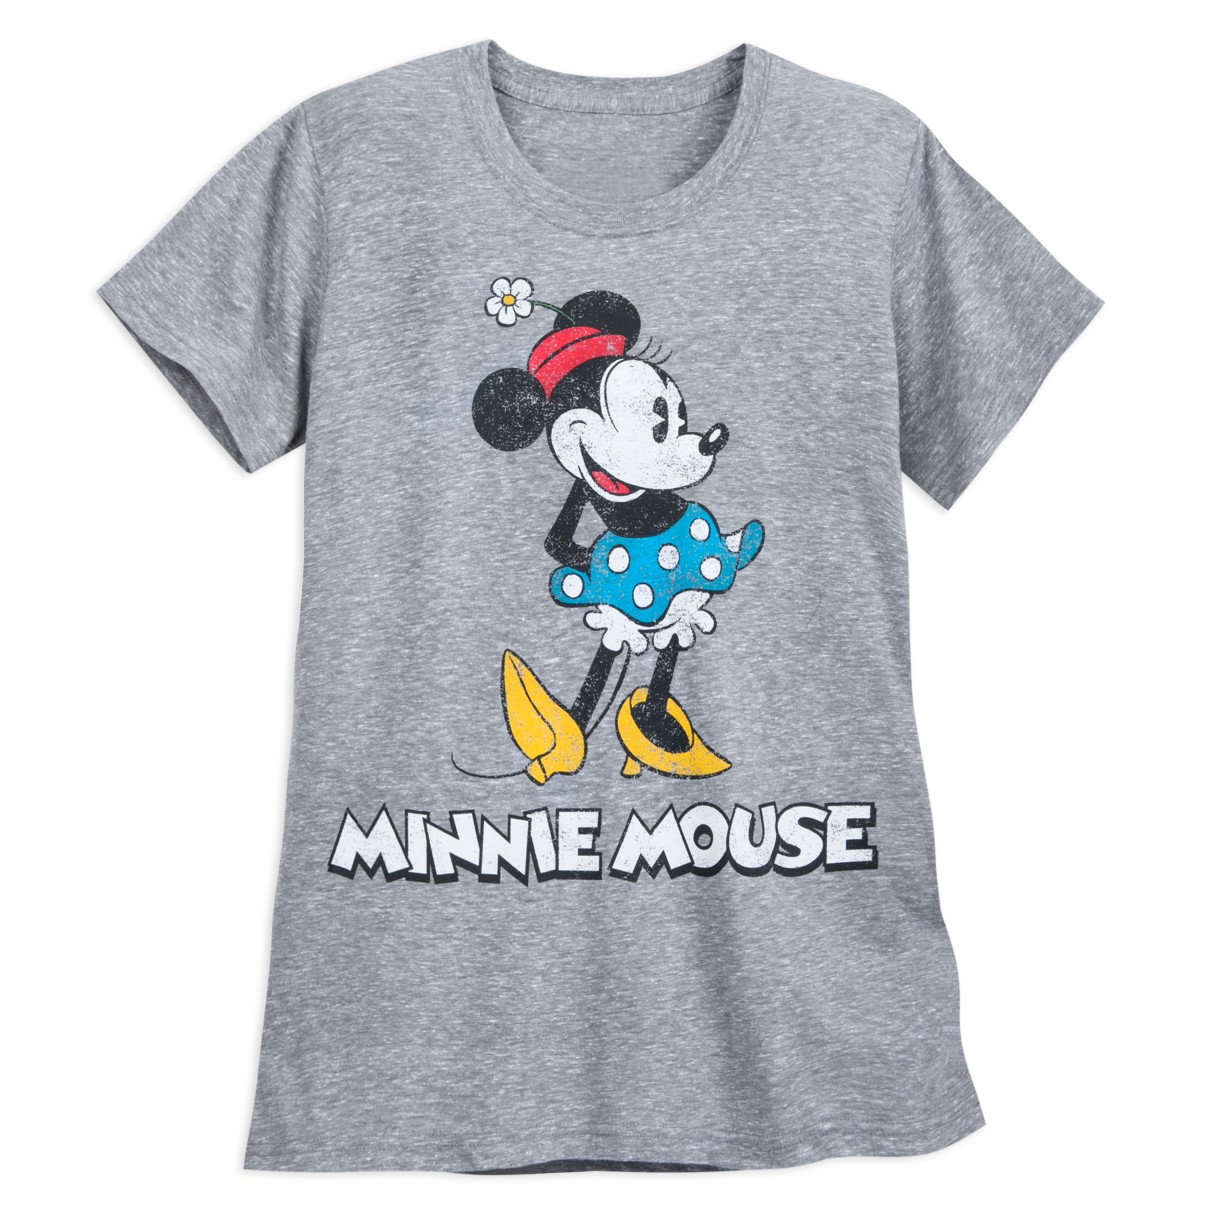 Minnie Mouse Classic T-Shirt for Women – Gray